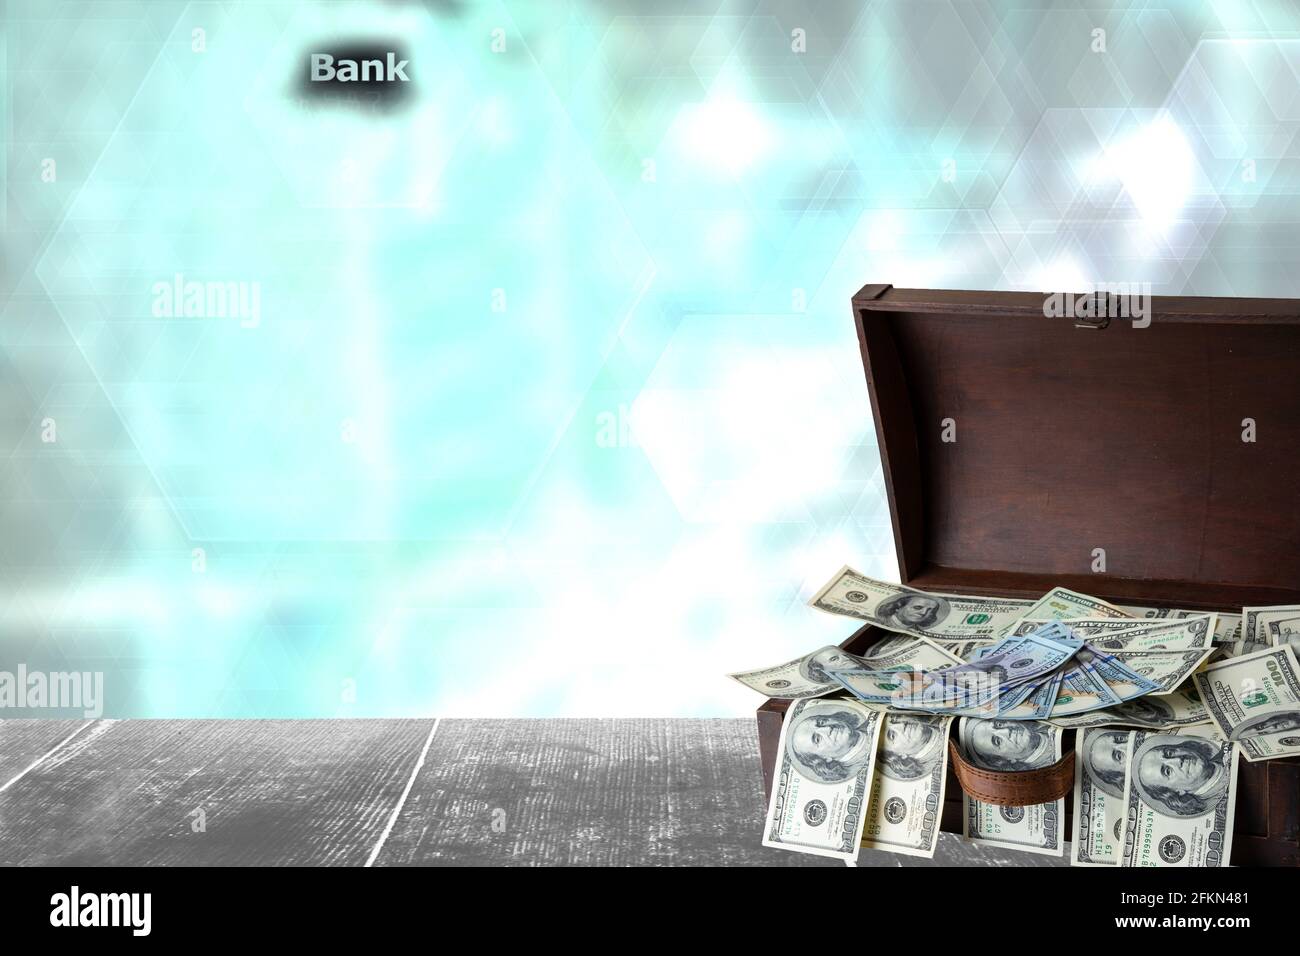 Finance concept. Wooden box full with US 100 dollars on table with abstract blurred bank houses silhouette background.  Concept of money and earnings. Stock Photo